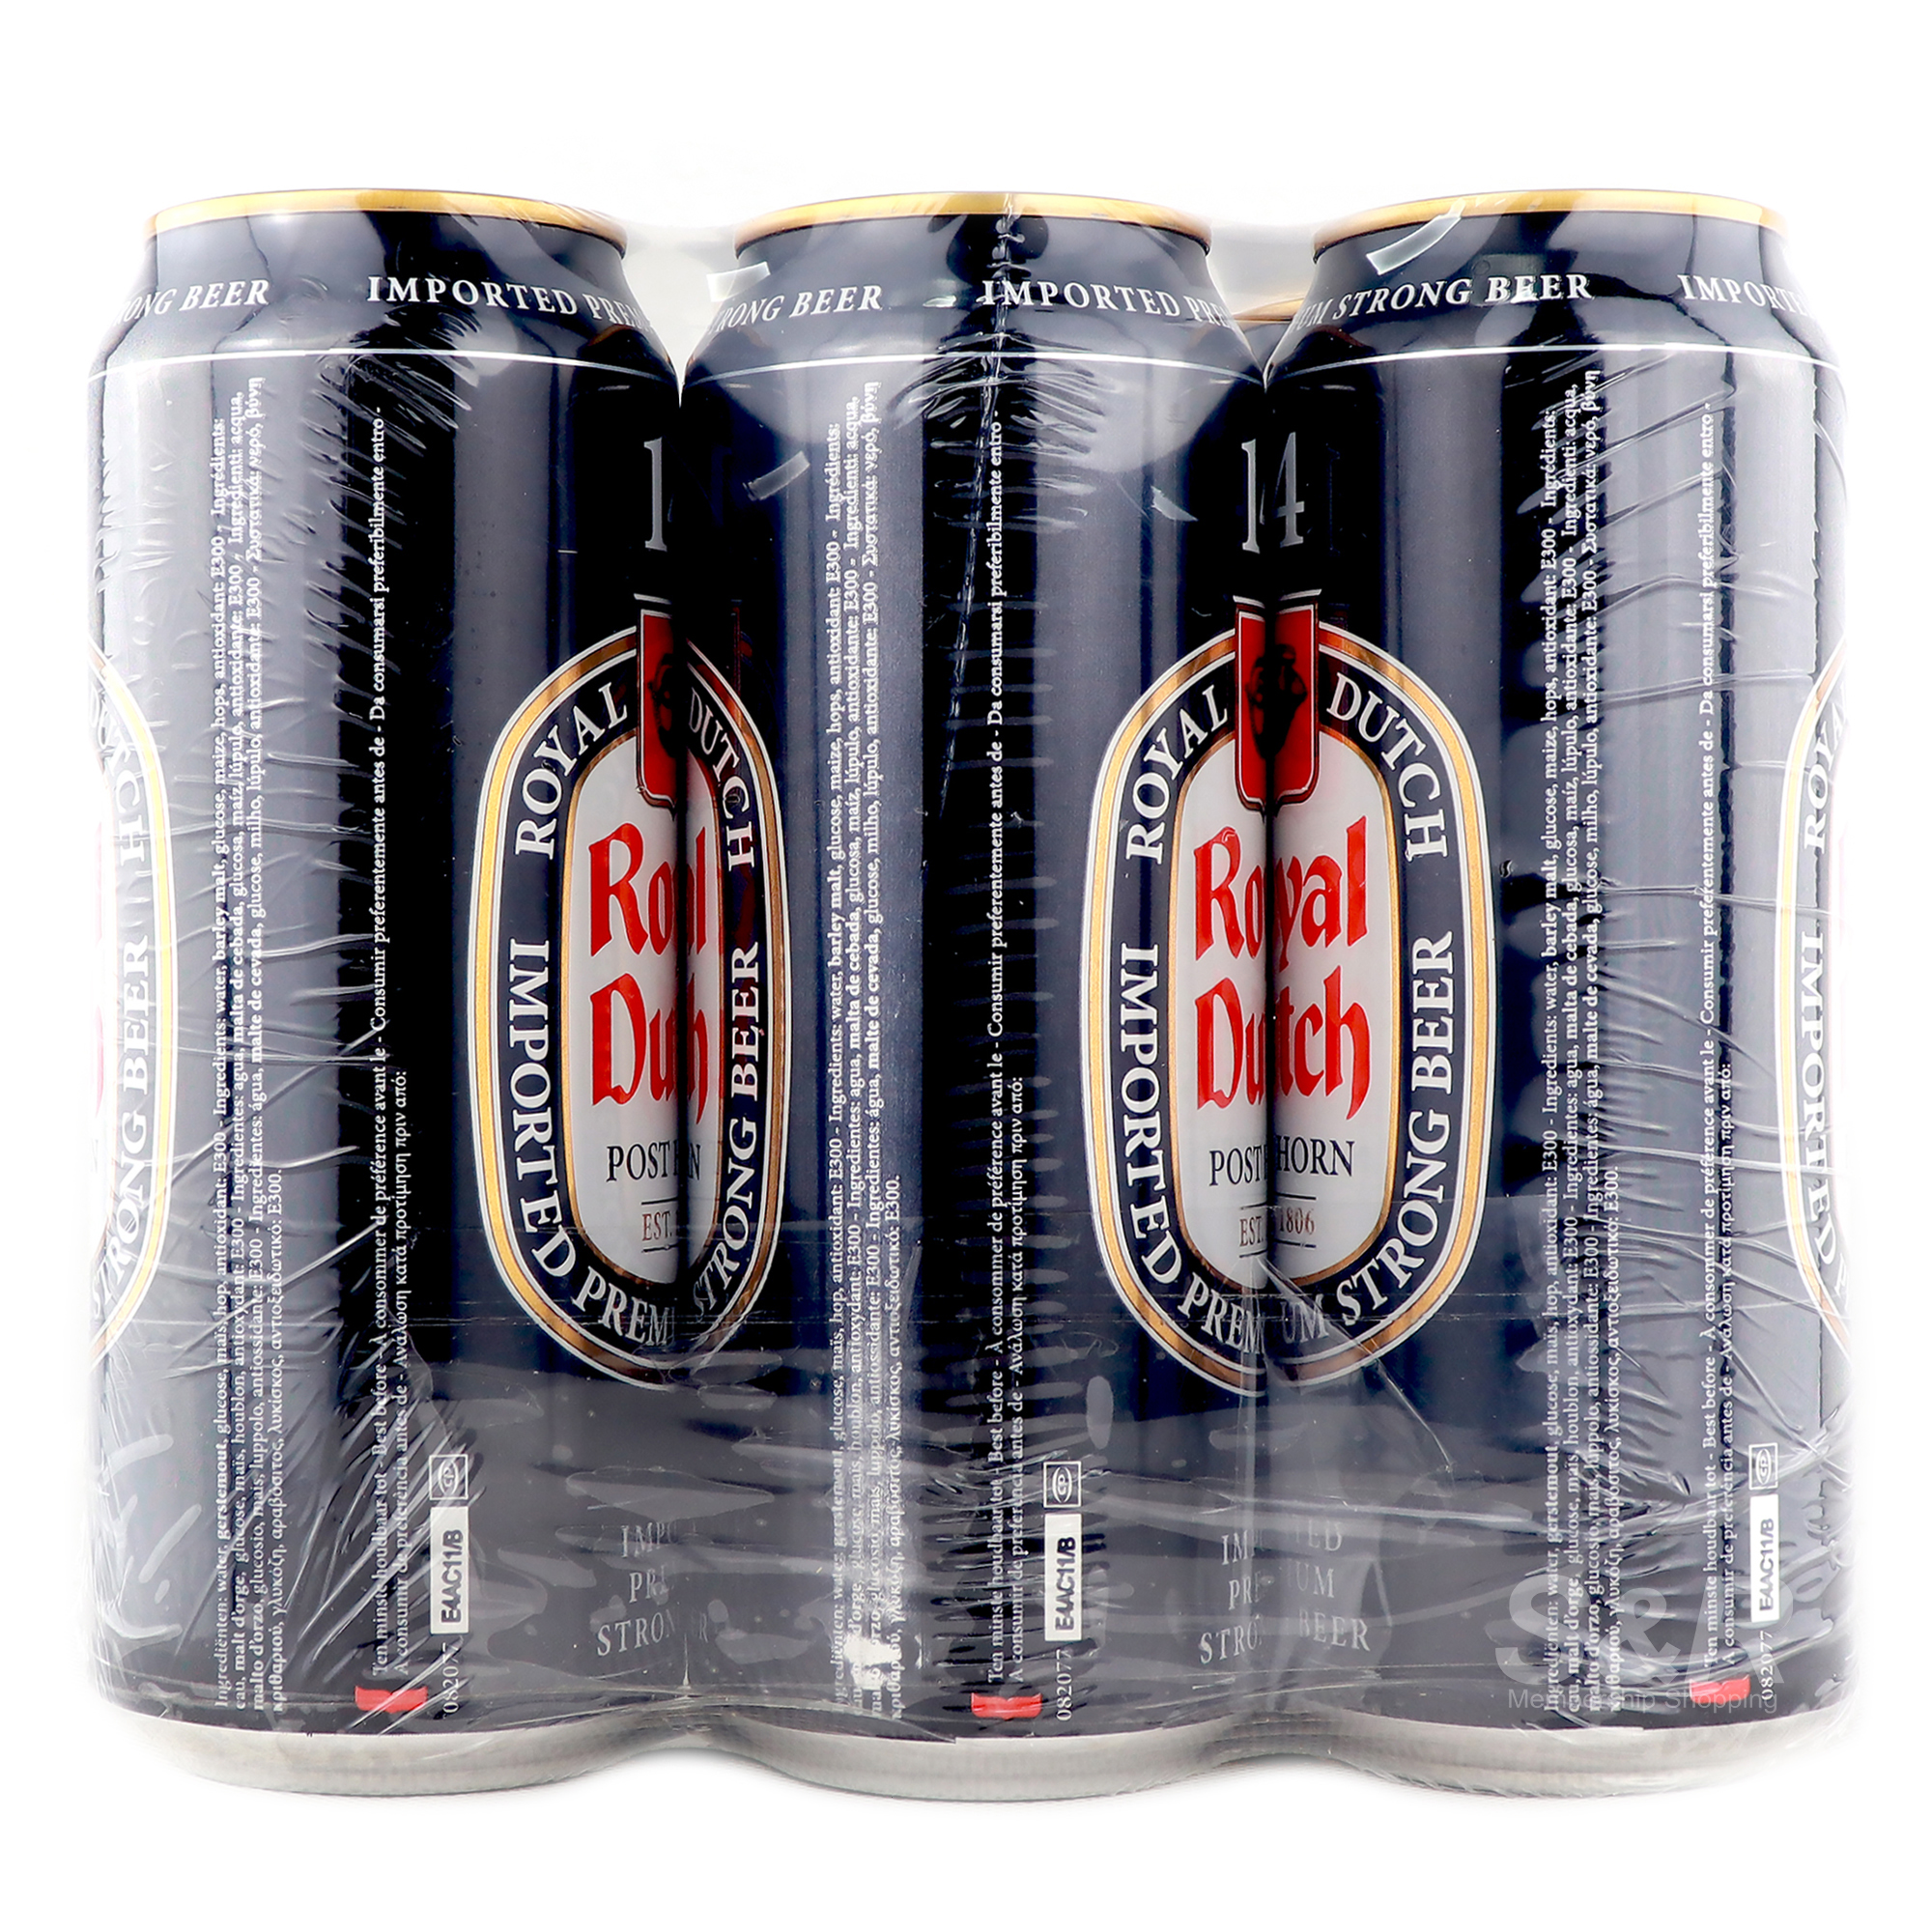 Royal Dutch Imported Premium Strong Beer 6 cans